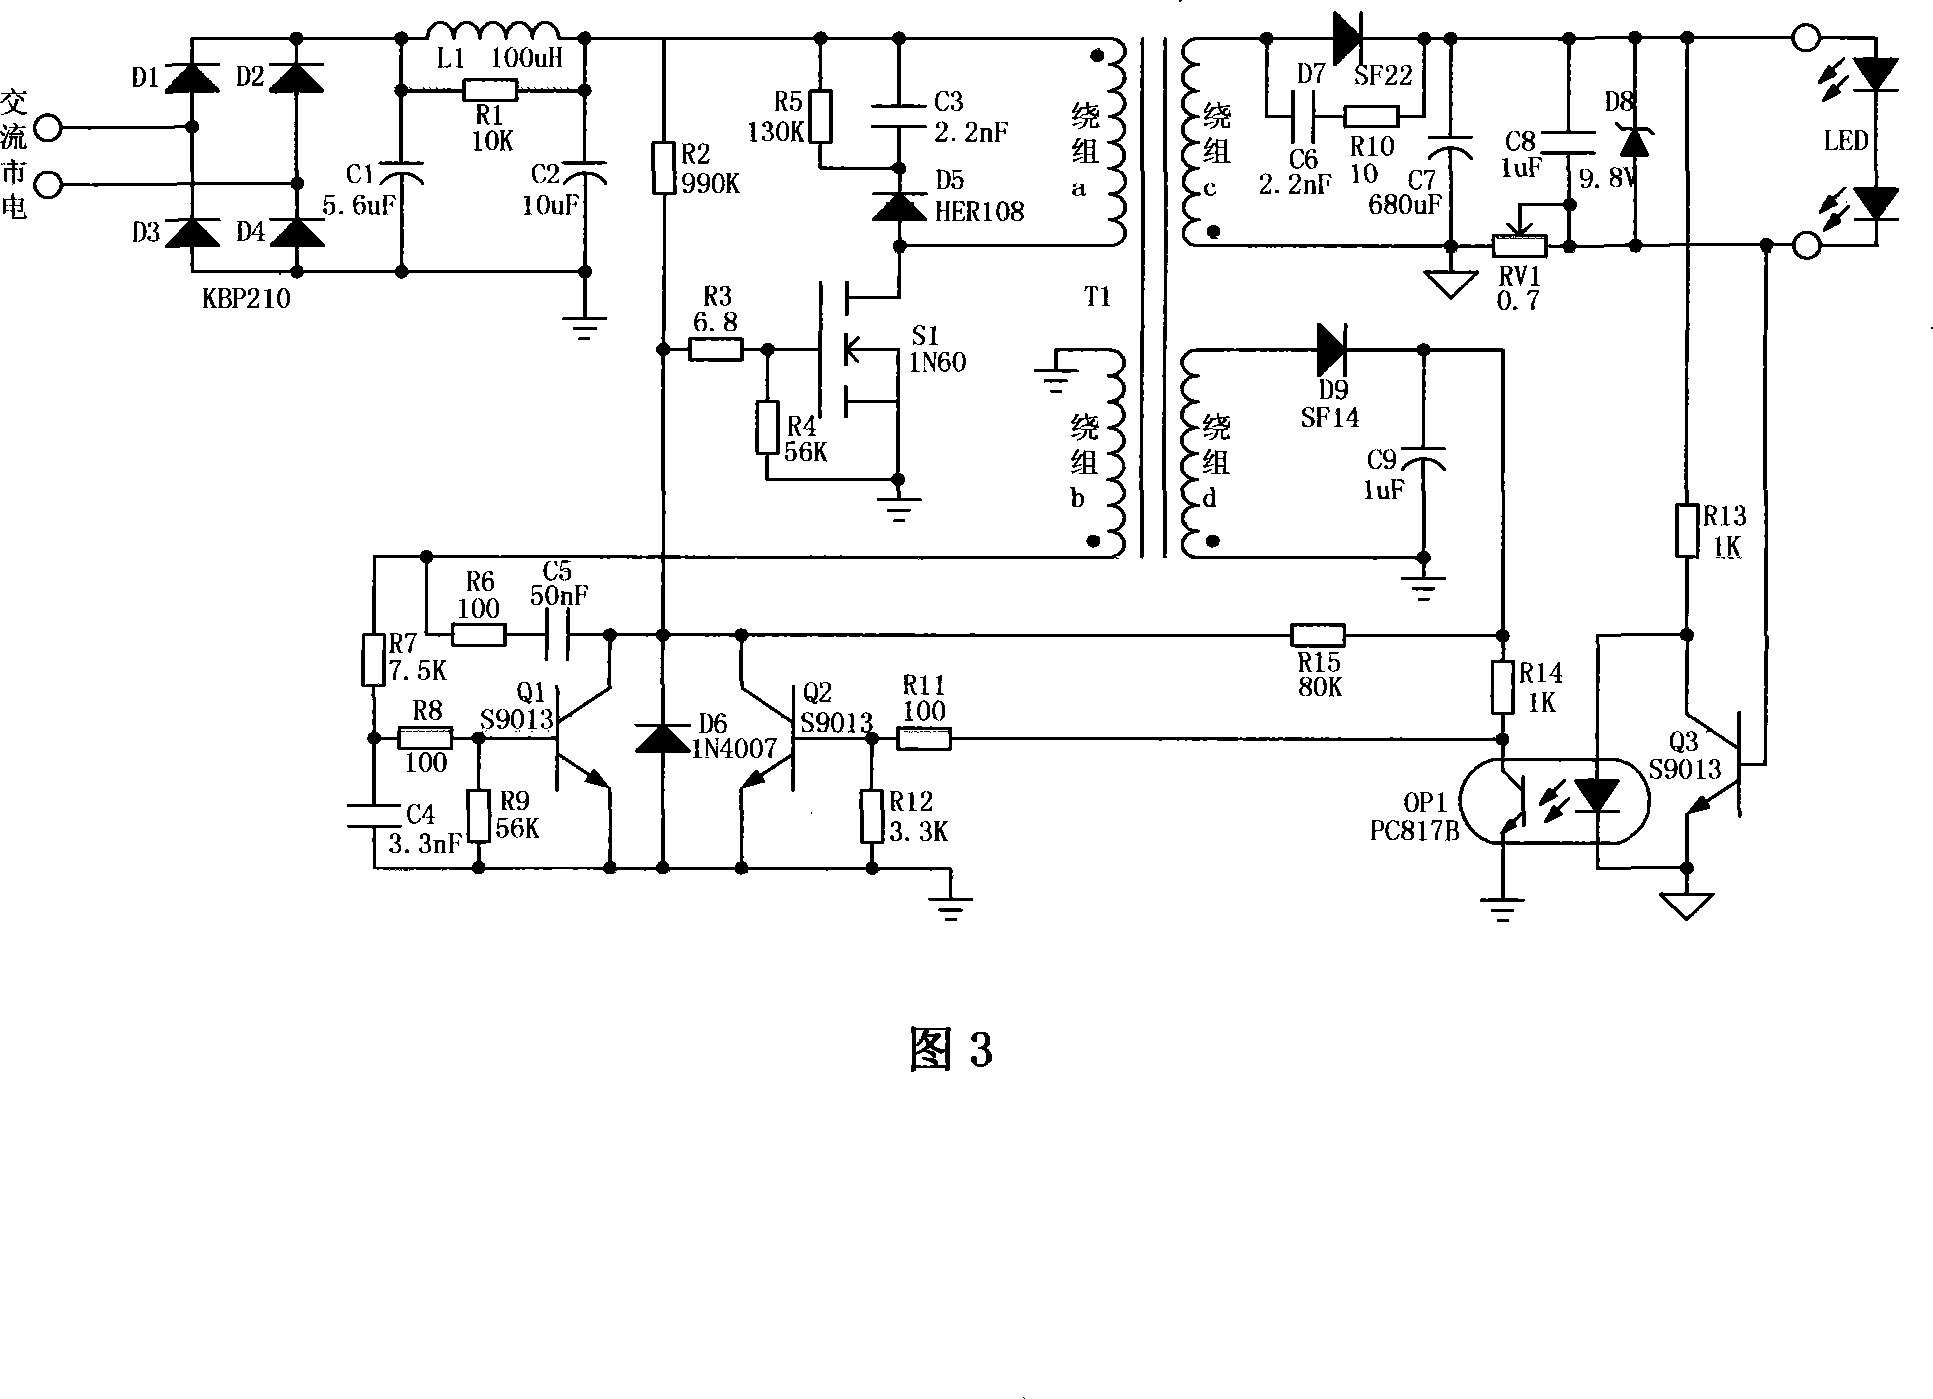 Self-excited oscillation type high power LED constant-current driving circuit